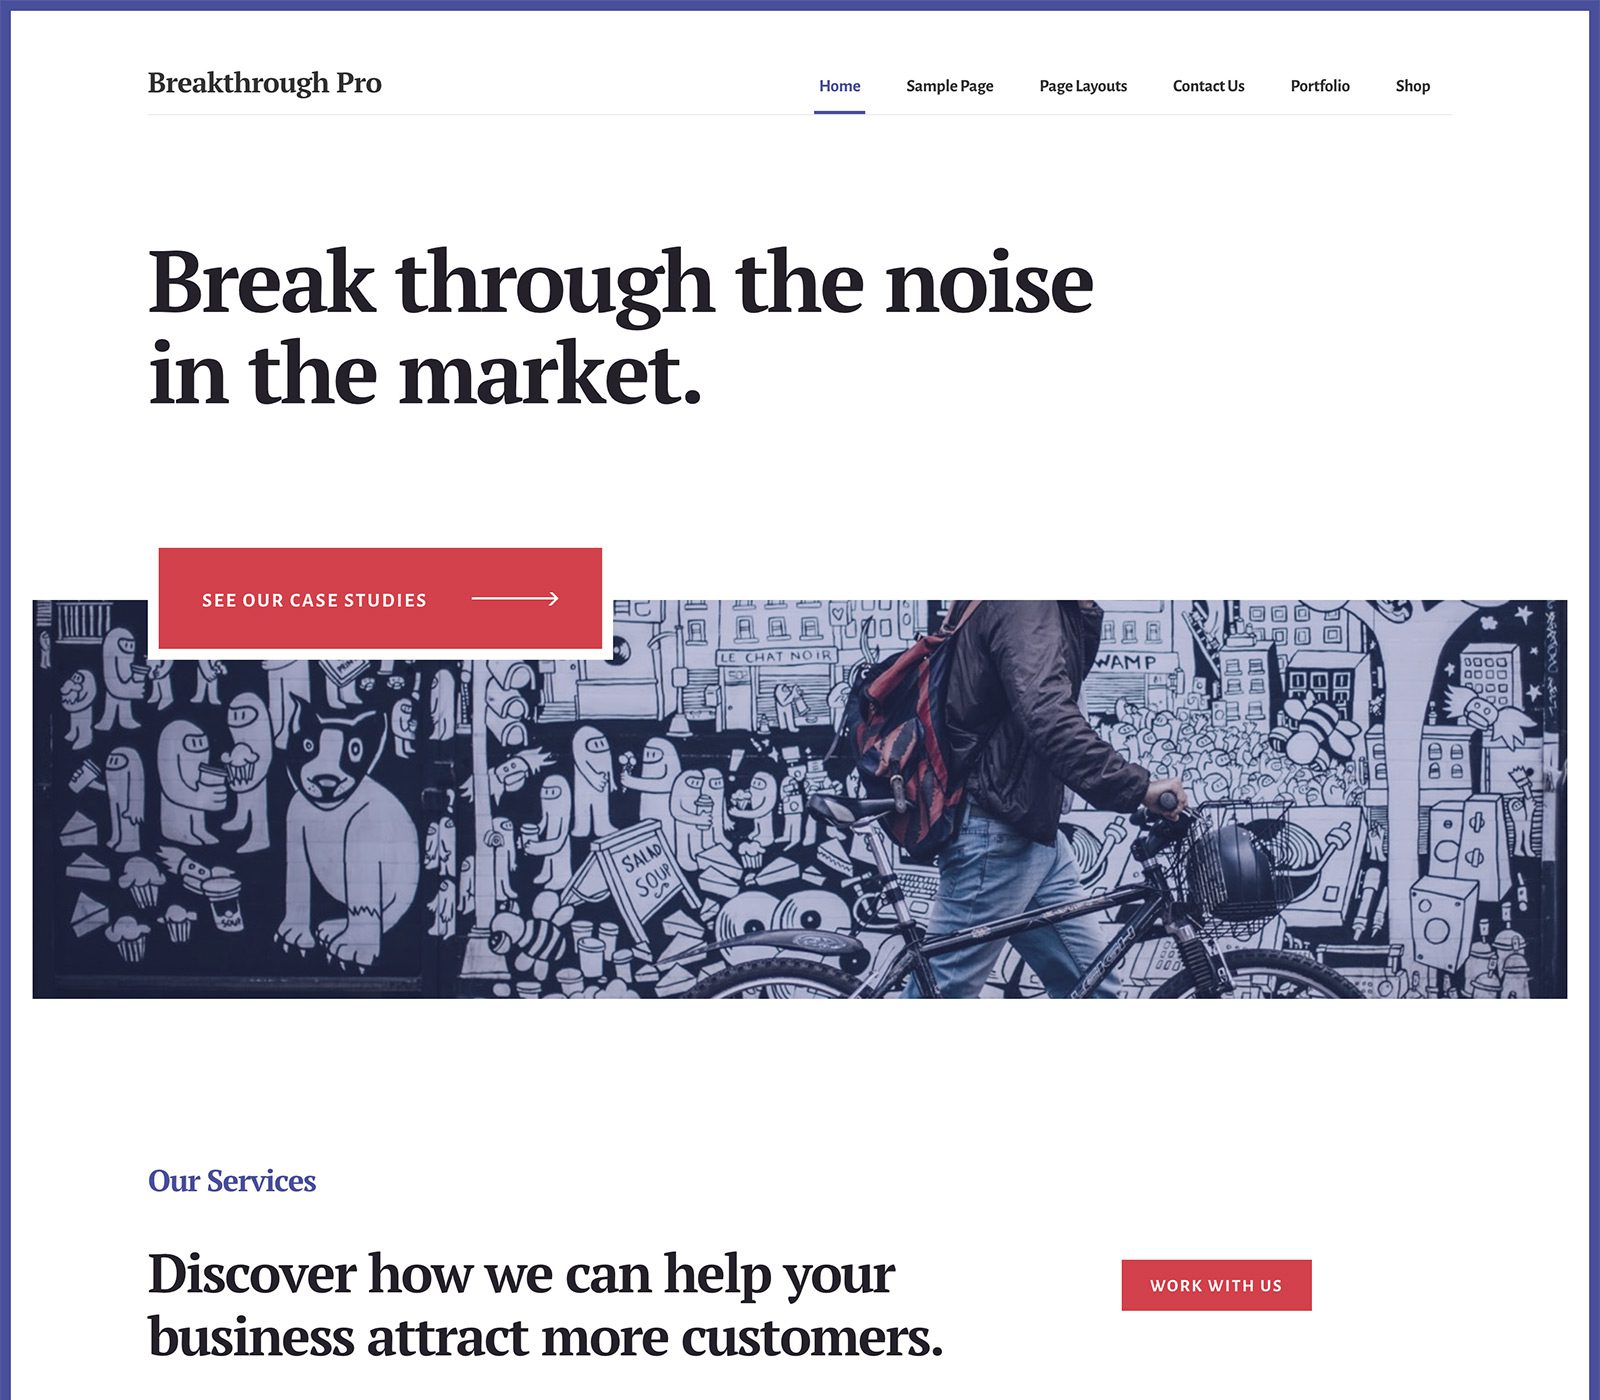 Breakthrough Pro is a popular theme for an advertising or marketing agency. It blends beautiful colors and minimal design. It’s sleek and modern. Perfect for your breakthrough moment, this design helps you demonstrate your work and services.